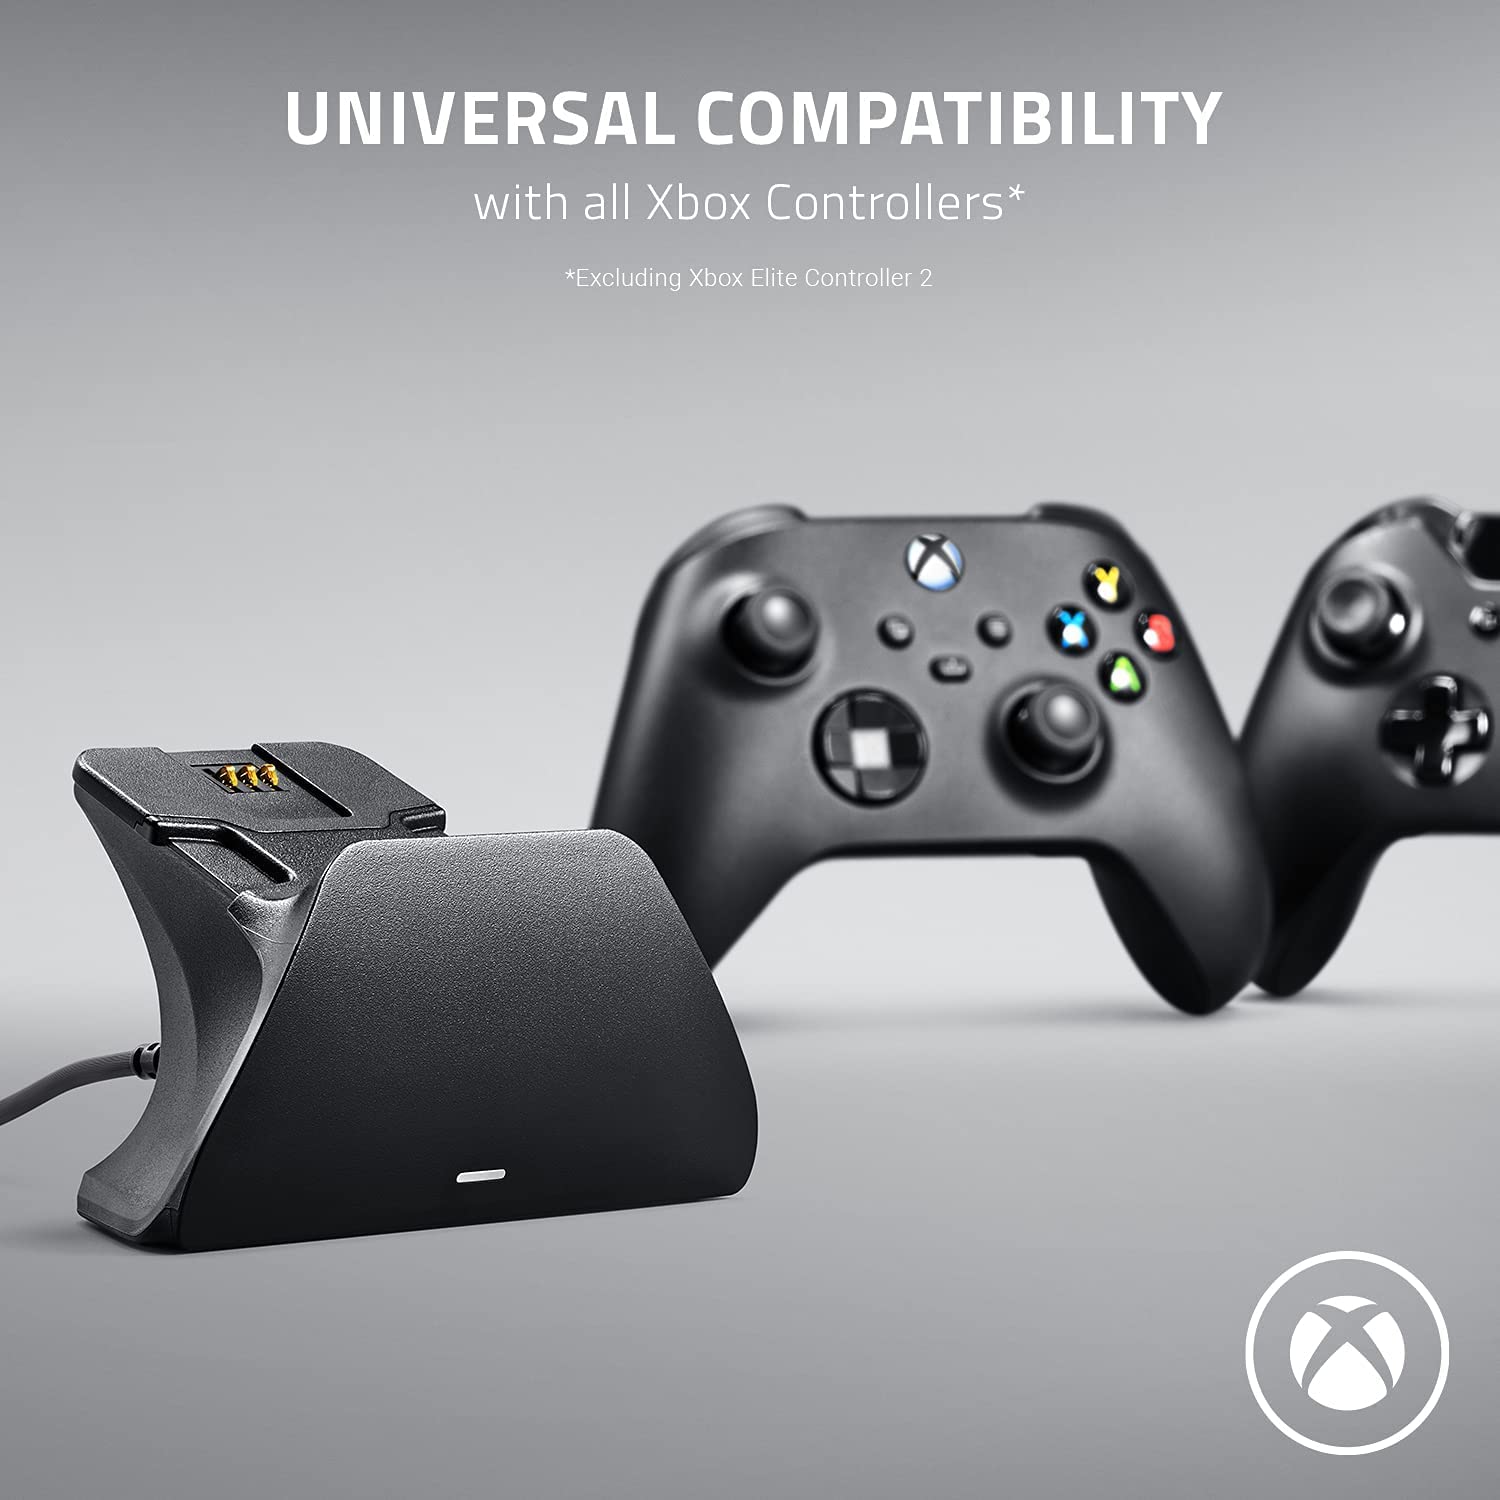 Razer Universal Quick Charging Stand for Xbox - (Universal Compatibility, Magnetic Contact System, Matches Your Xbox Controller, One-Handed Navigation) White